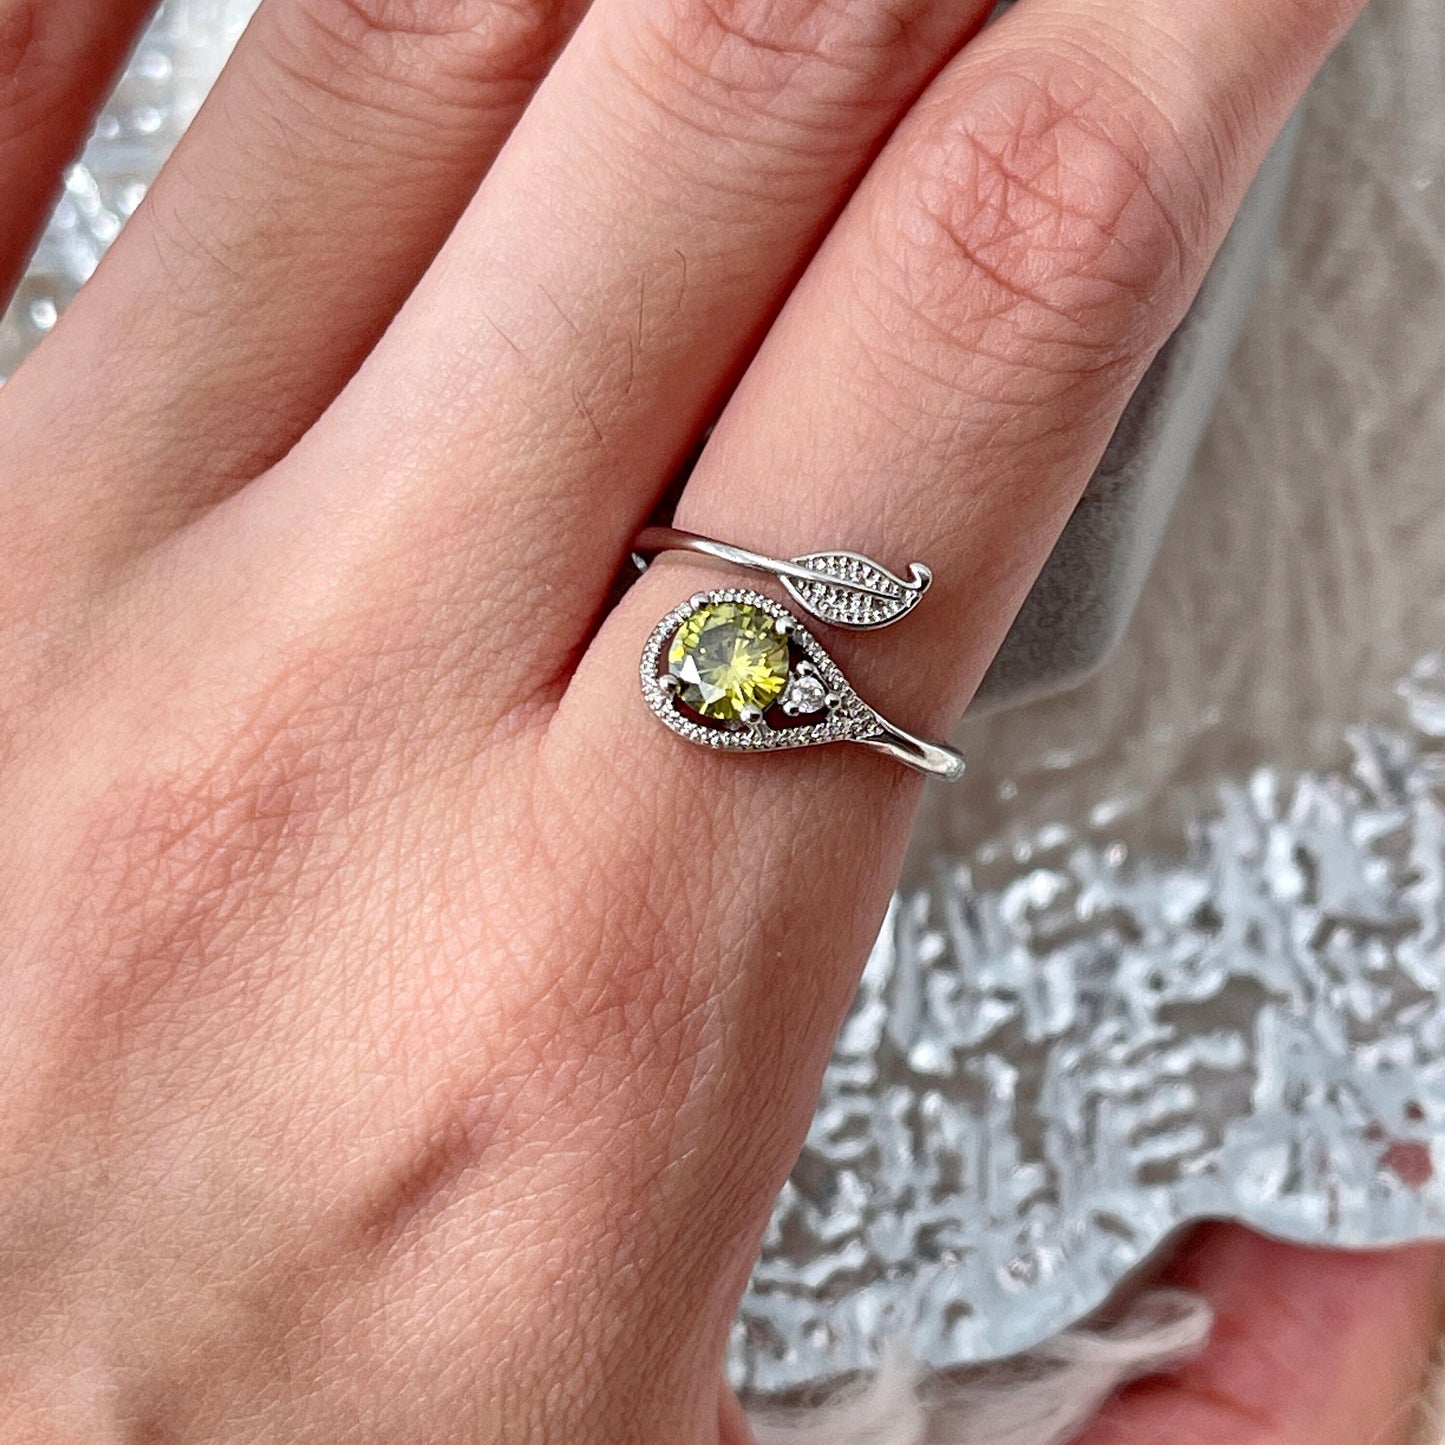 Olive green ring, Leaf vine ring, Lemon green ring, Uniuqe promise ring, Olive crystal ring, Round solitaire ring,Birthday Anniversary Gift